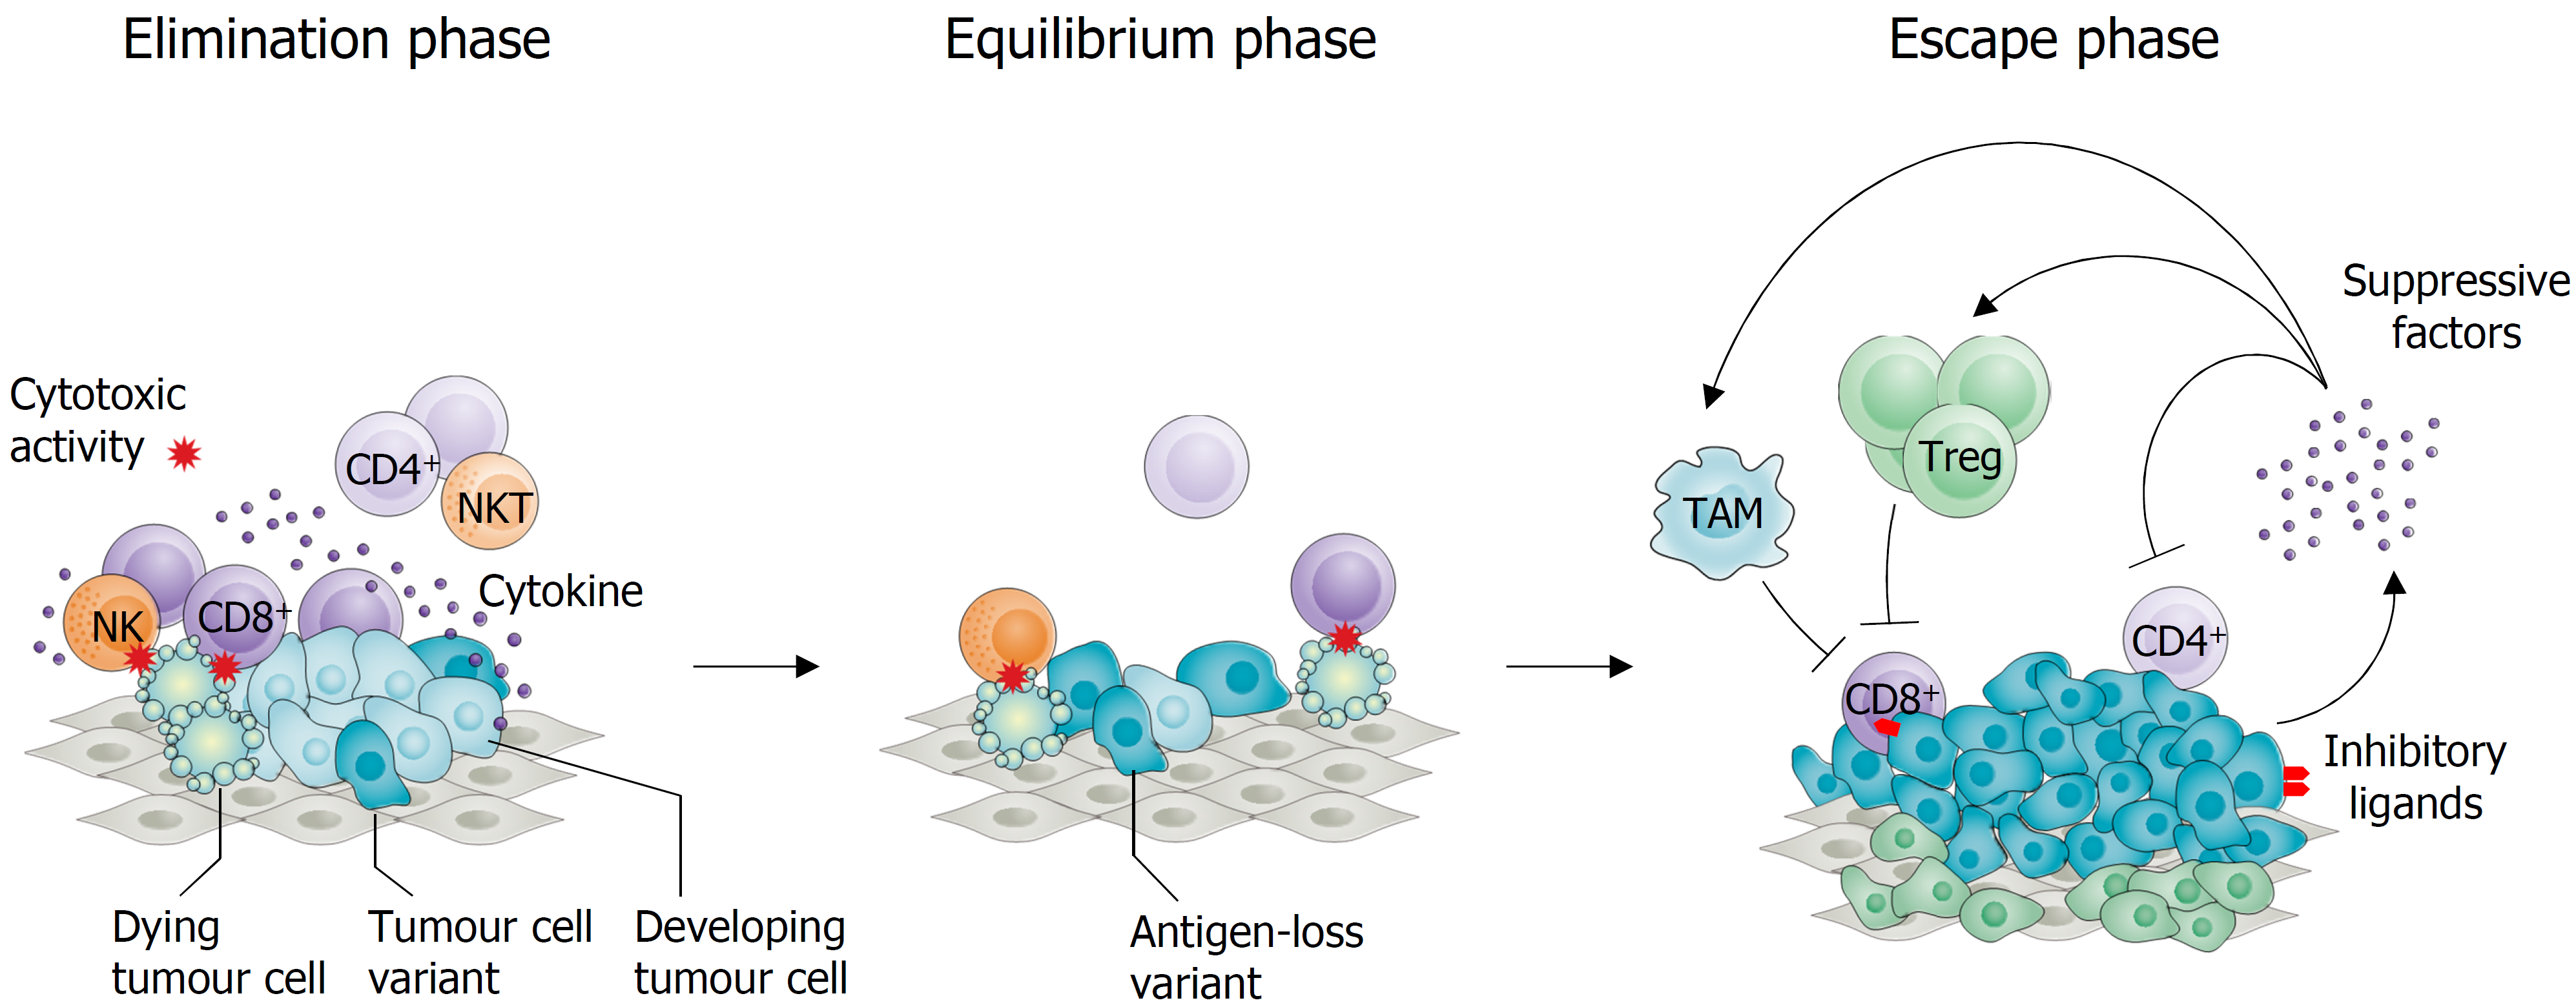 How is the function of the immune system suppressed during tumour development?